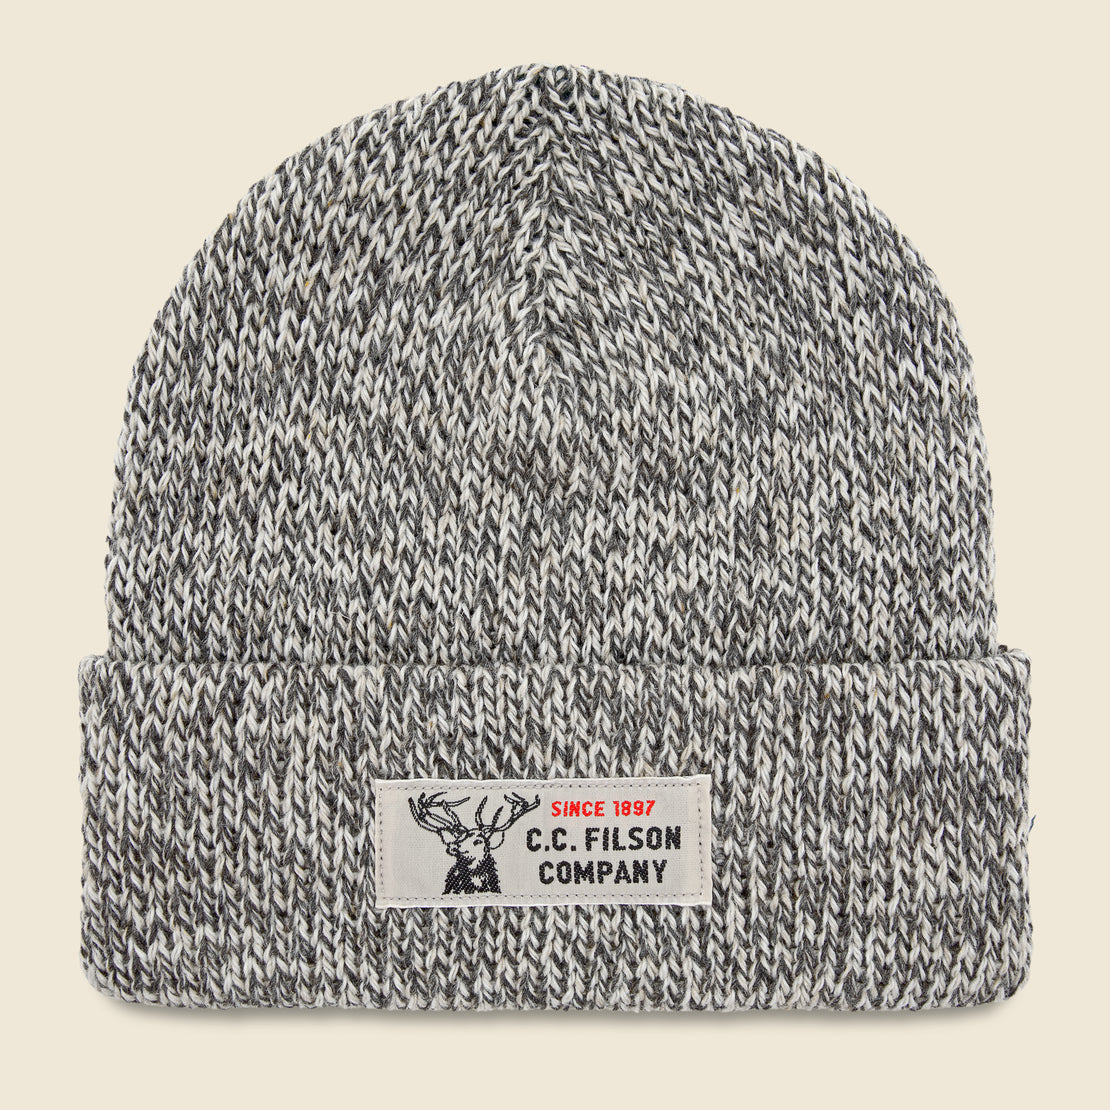 Filson Lined Ragg Wool Beanie - Charcoal Leather